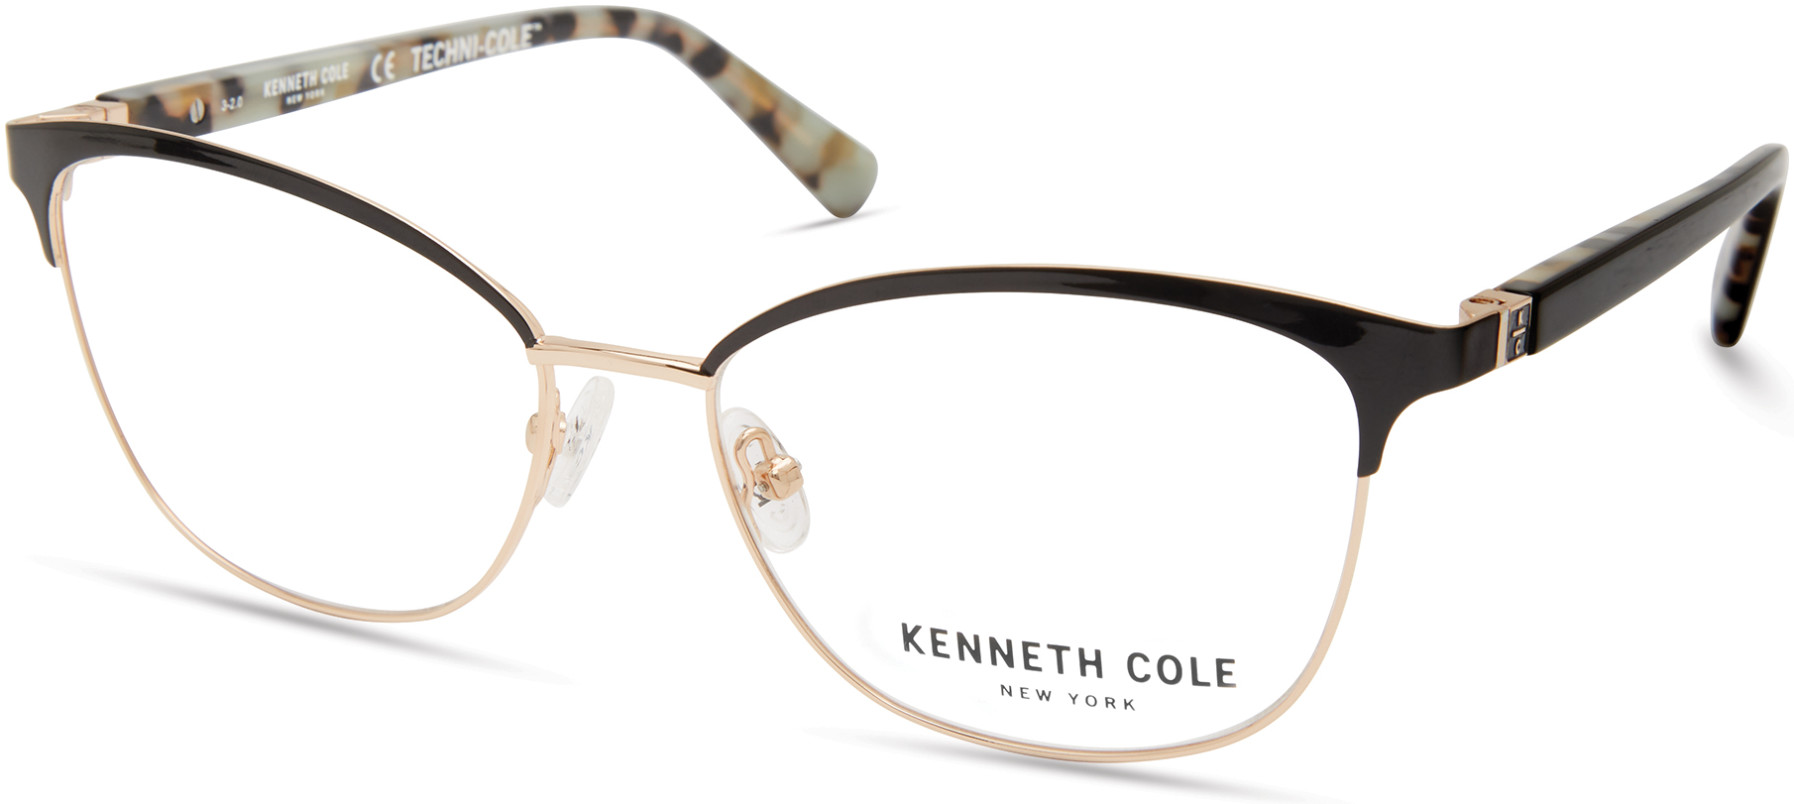 KENNETH COLE NY 0329 001